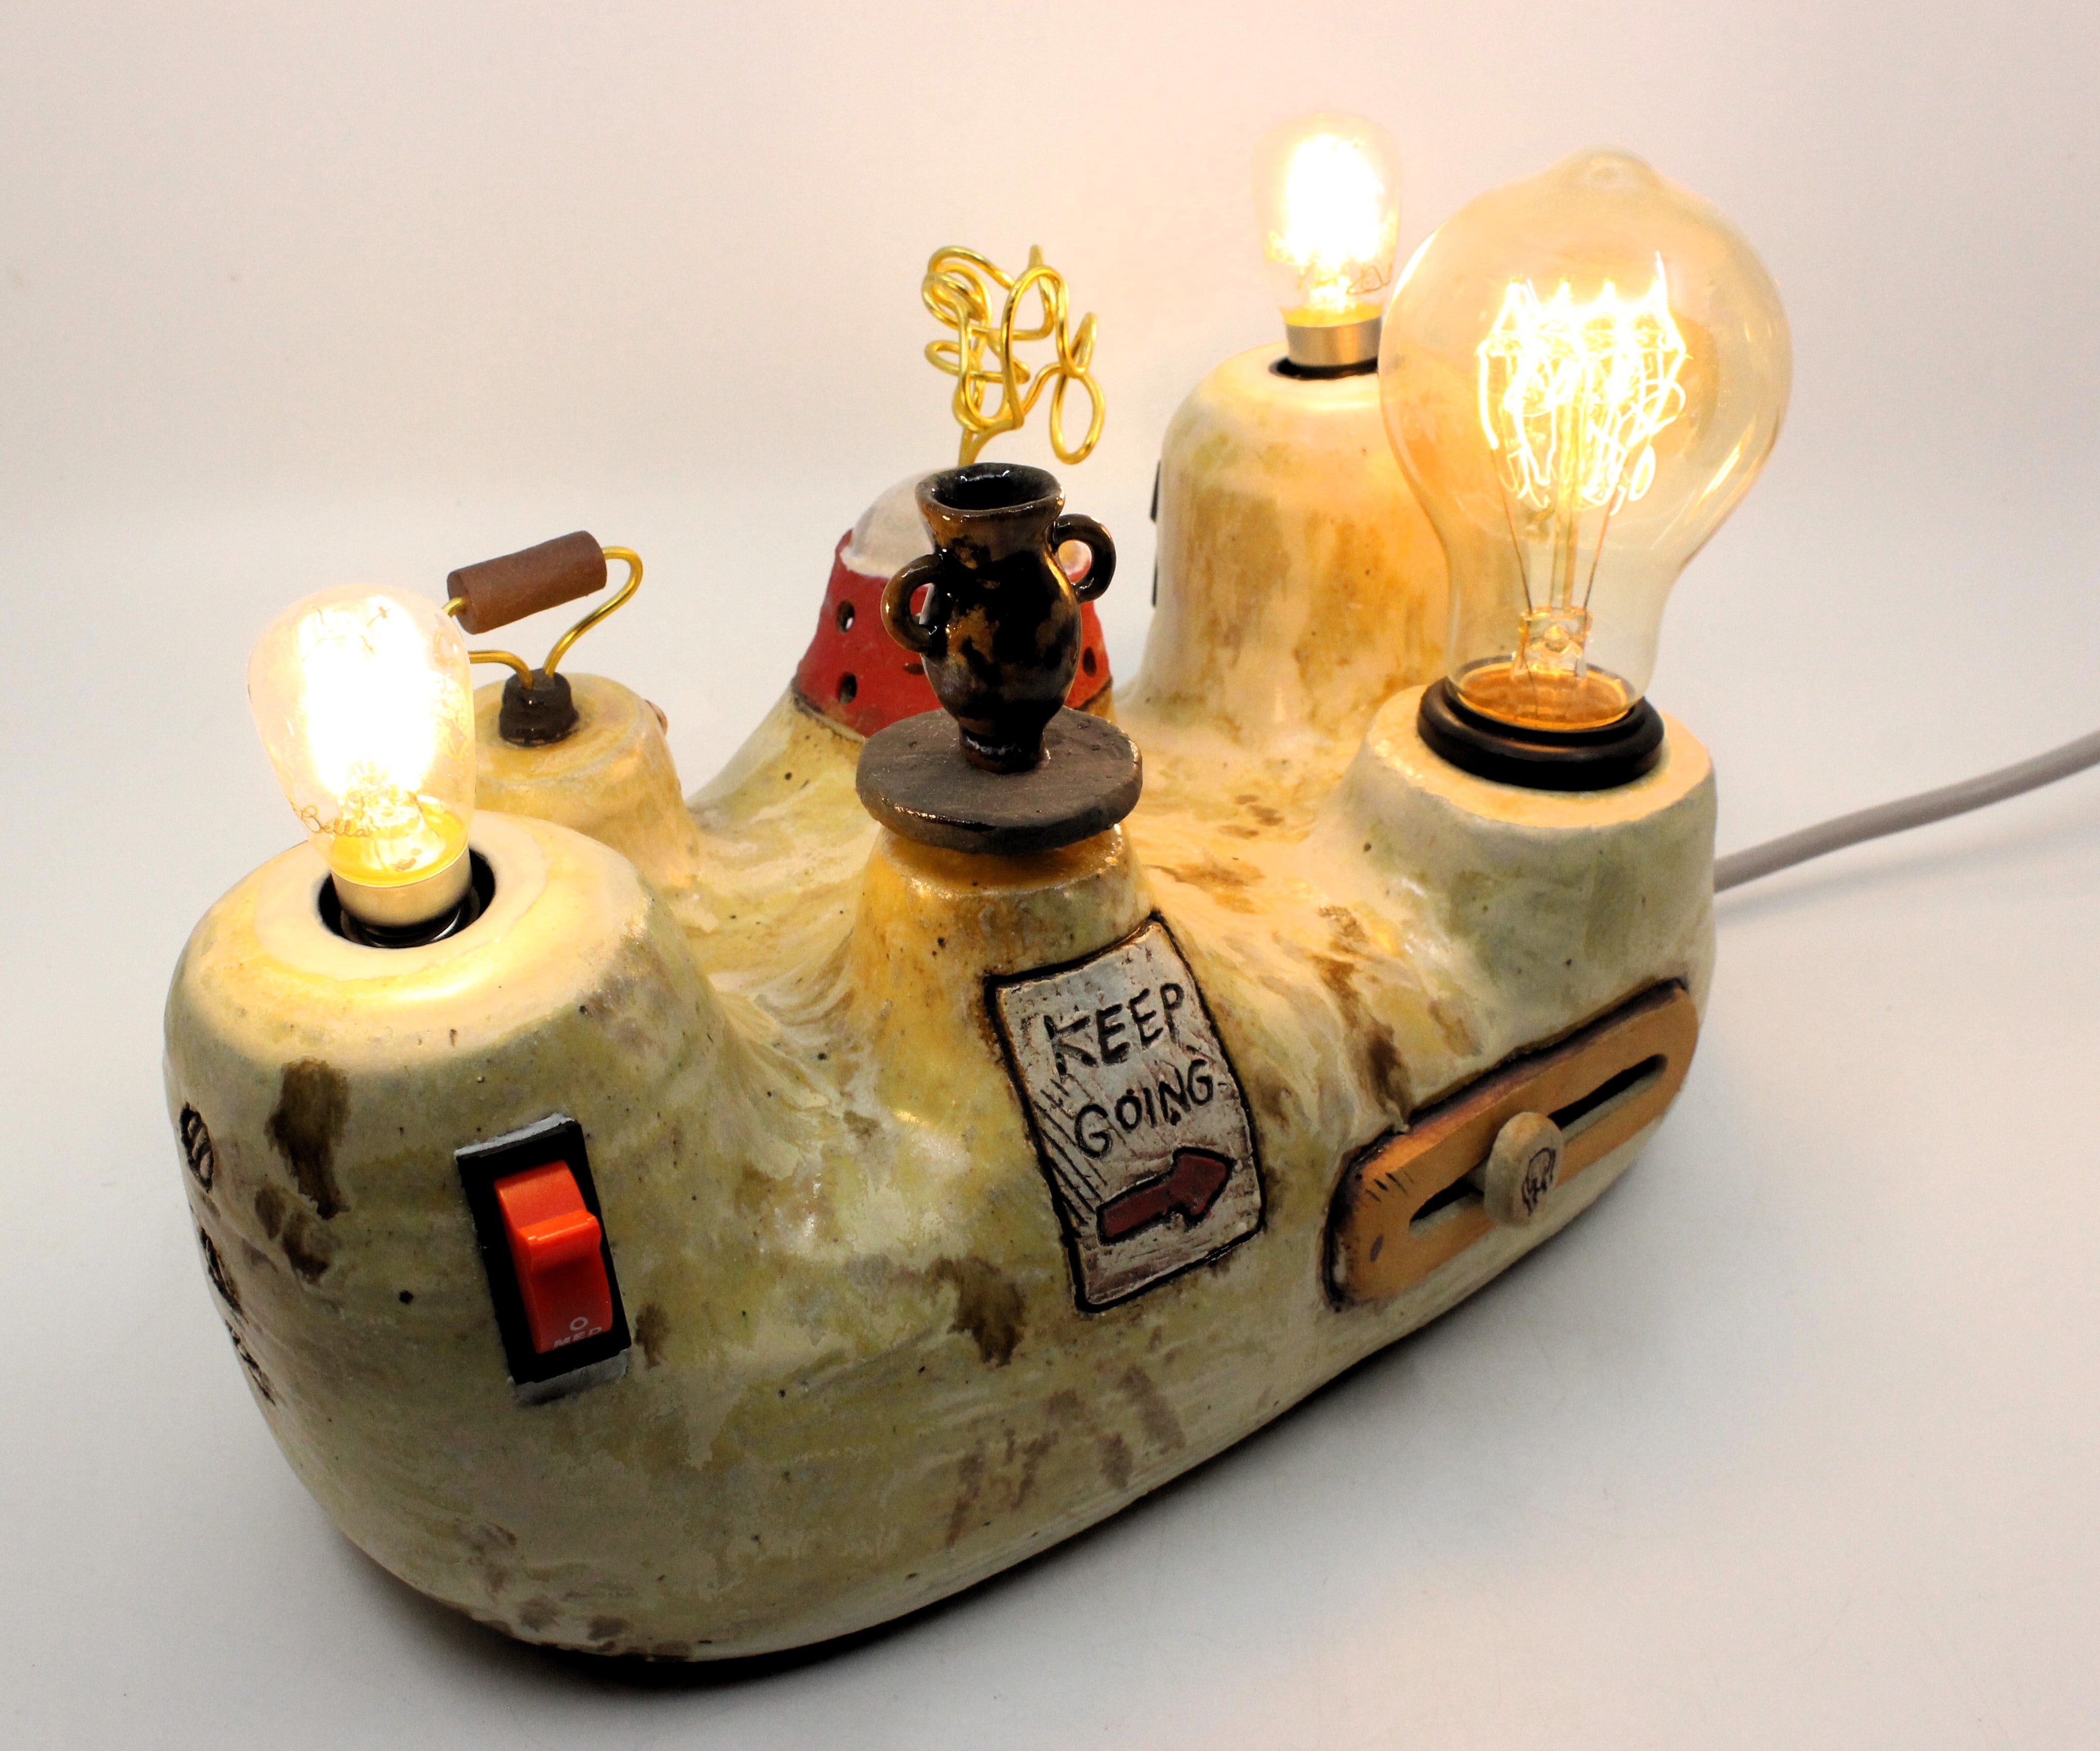 Radio Dimmable Lamp Ceramics Handle With Clay 